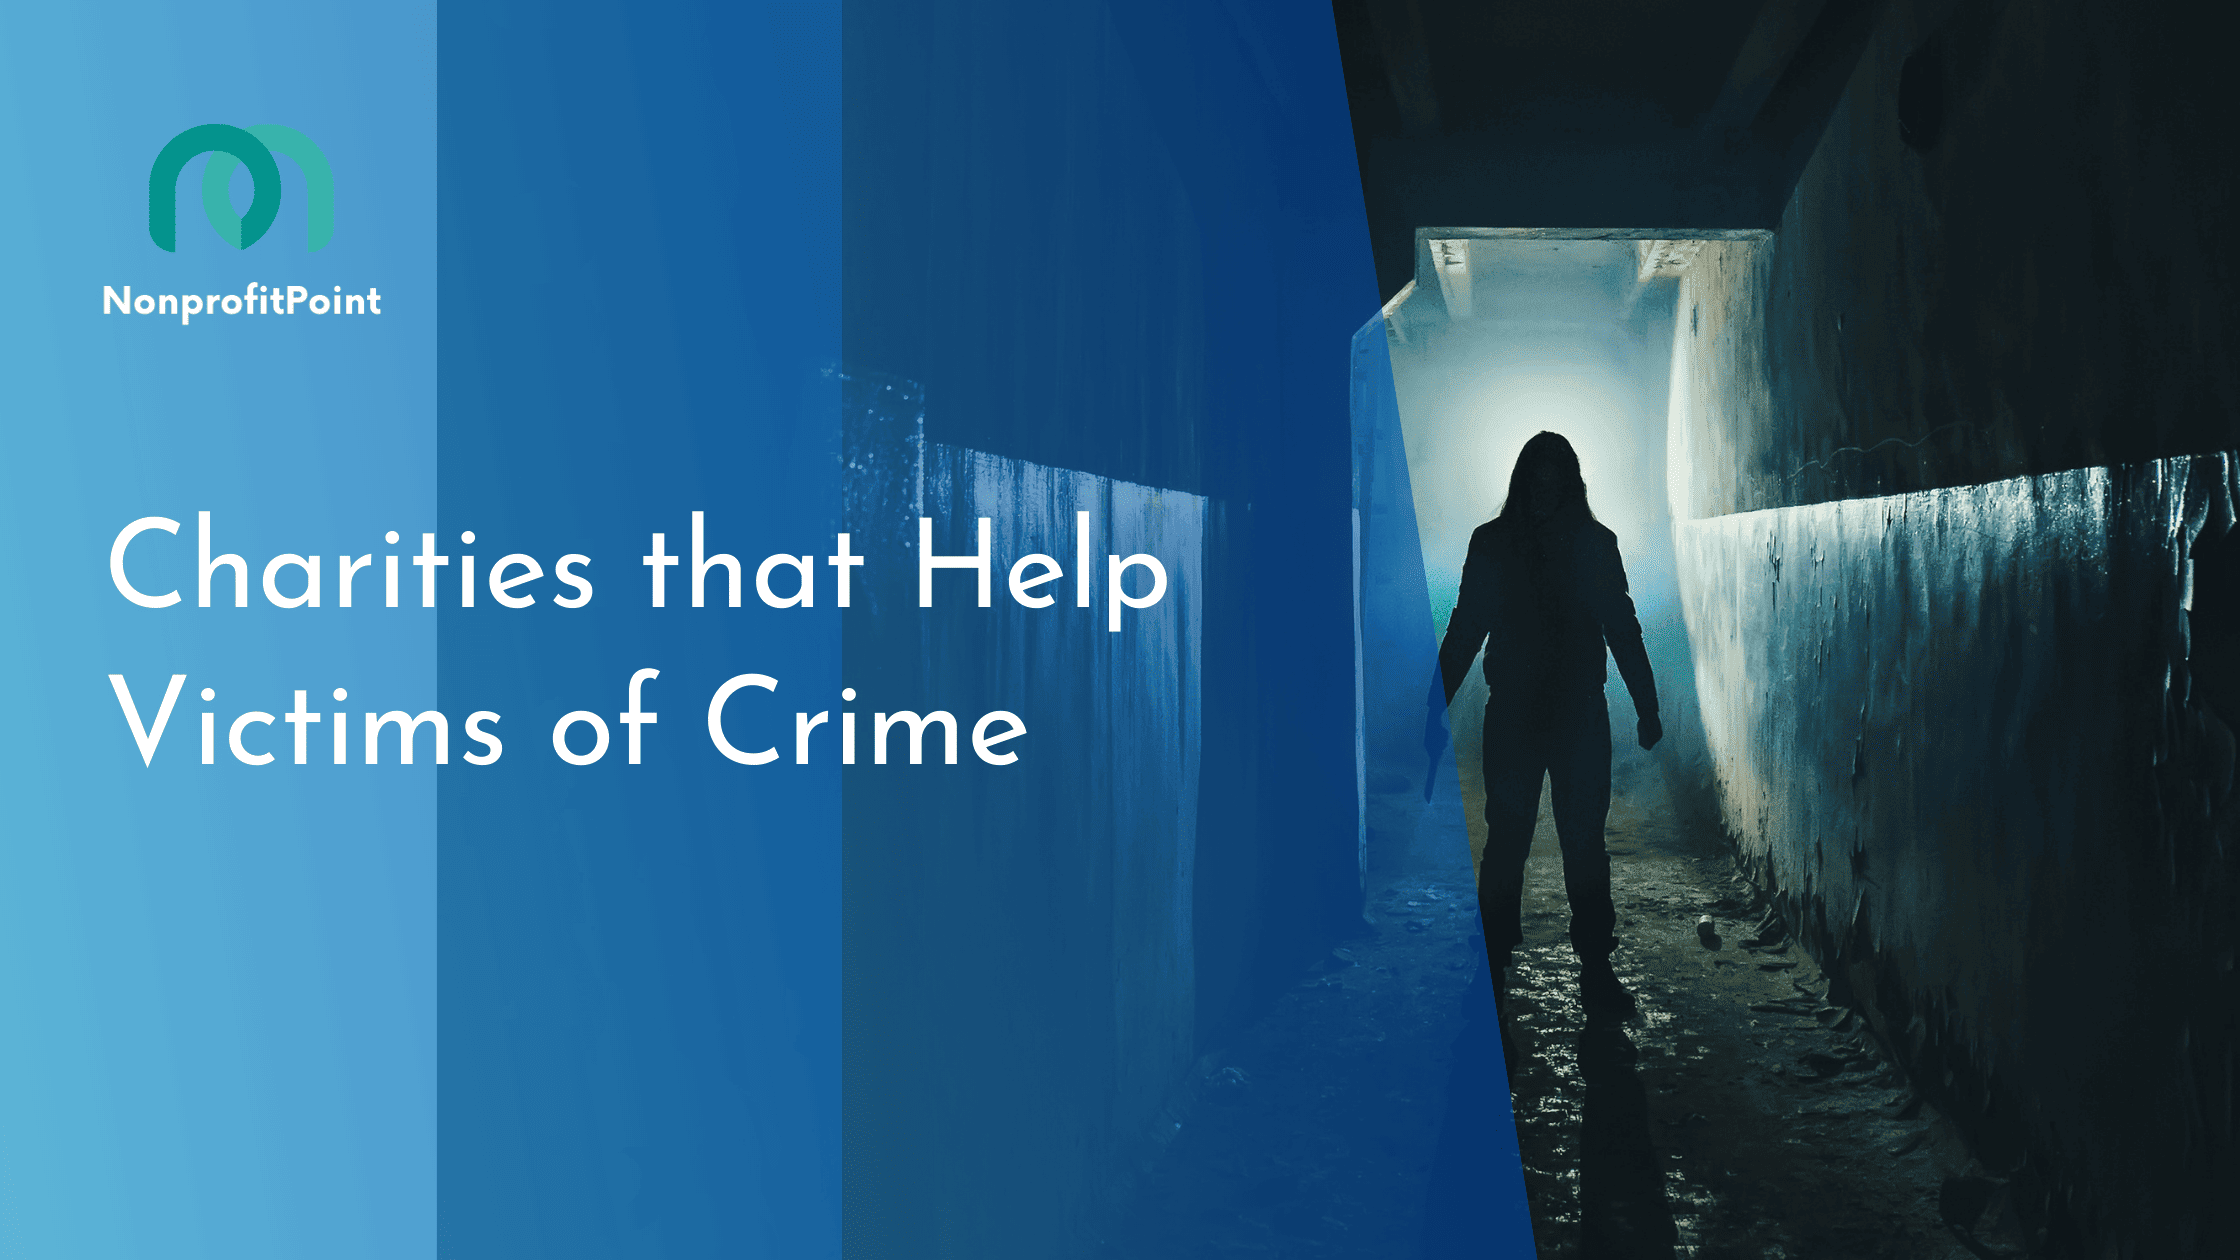 Charities that Help Victims of Crime